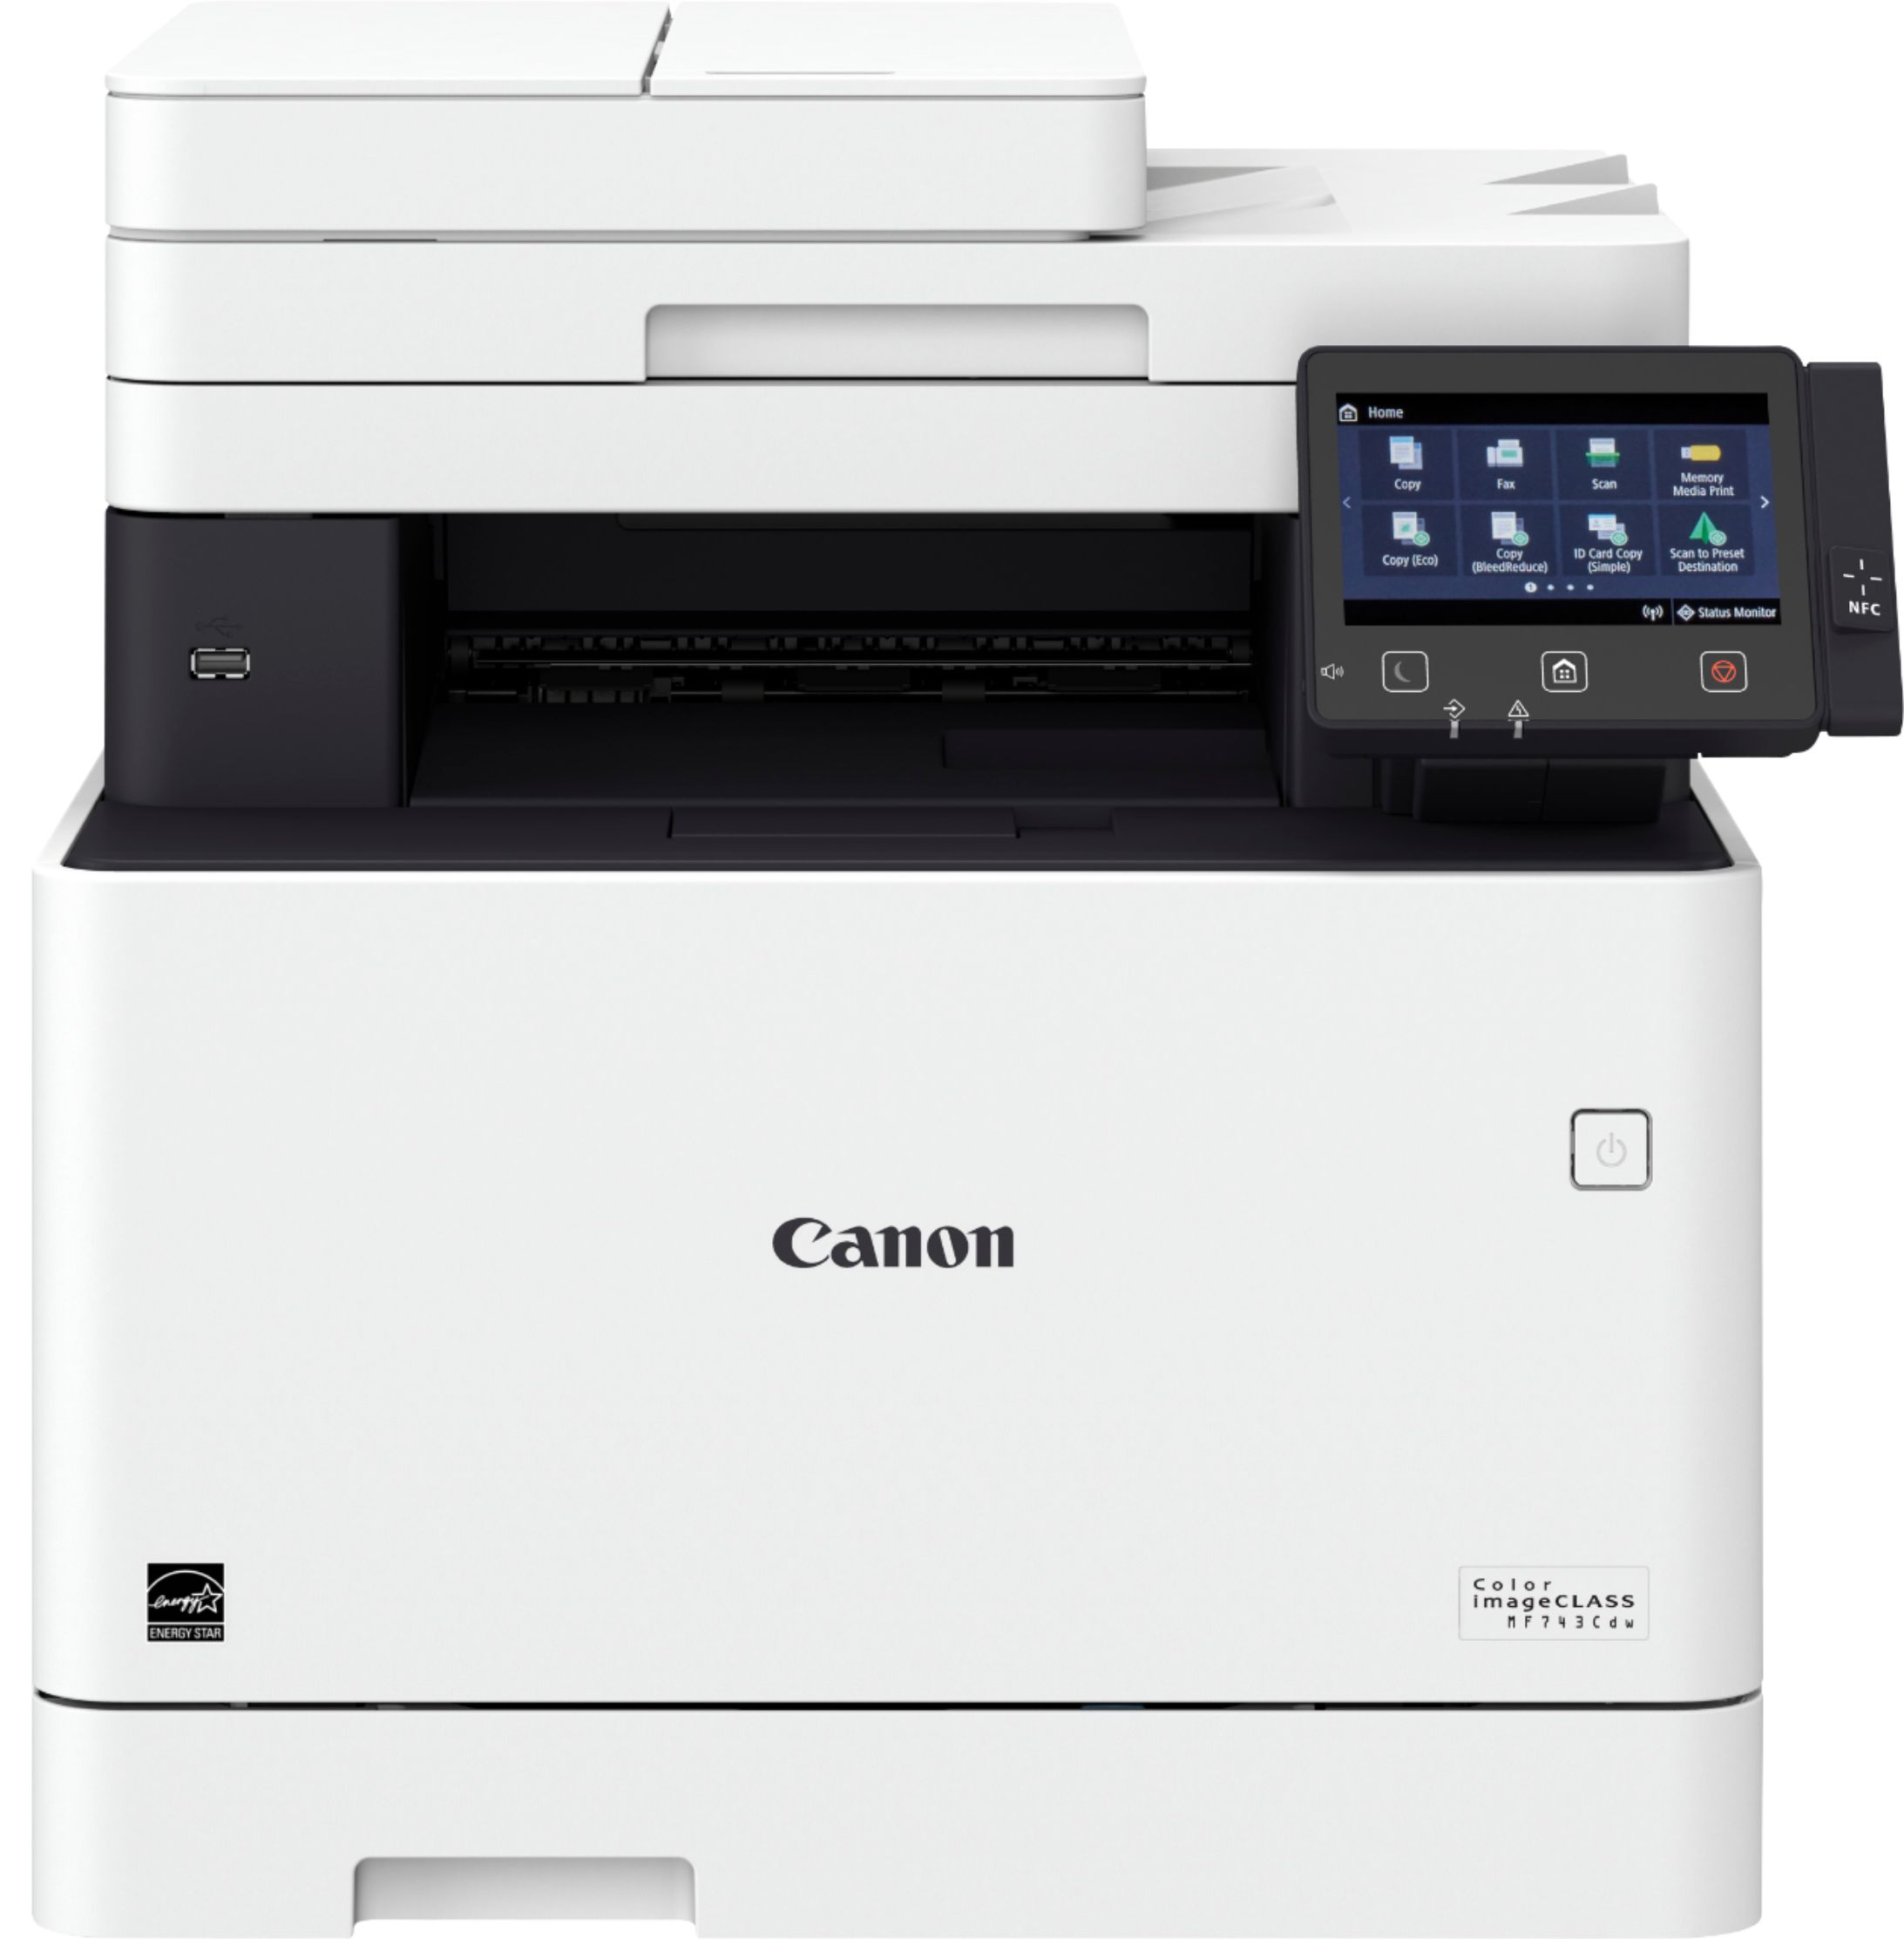 Canon imageCLASS MF743Cdw Color All-In-One Printer White 3101C011 - Best Buy